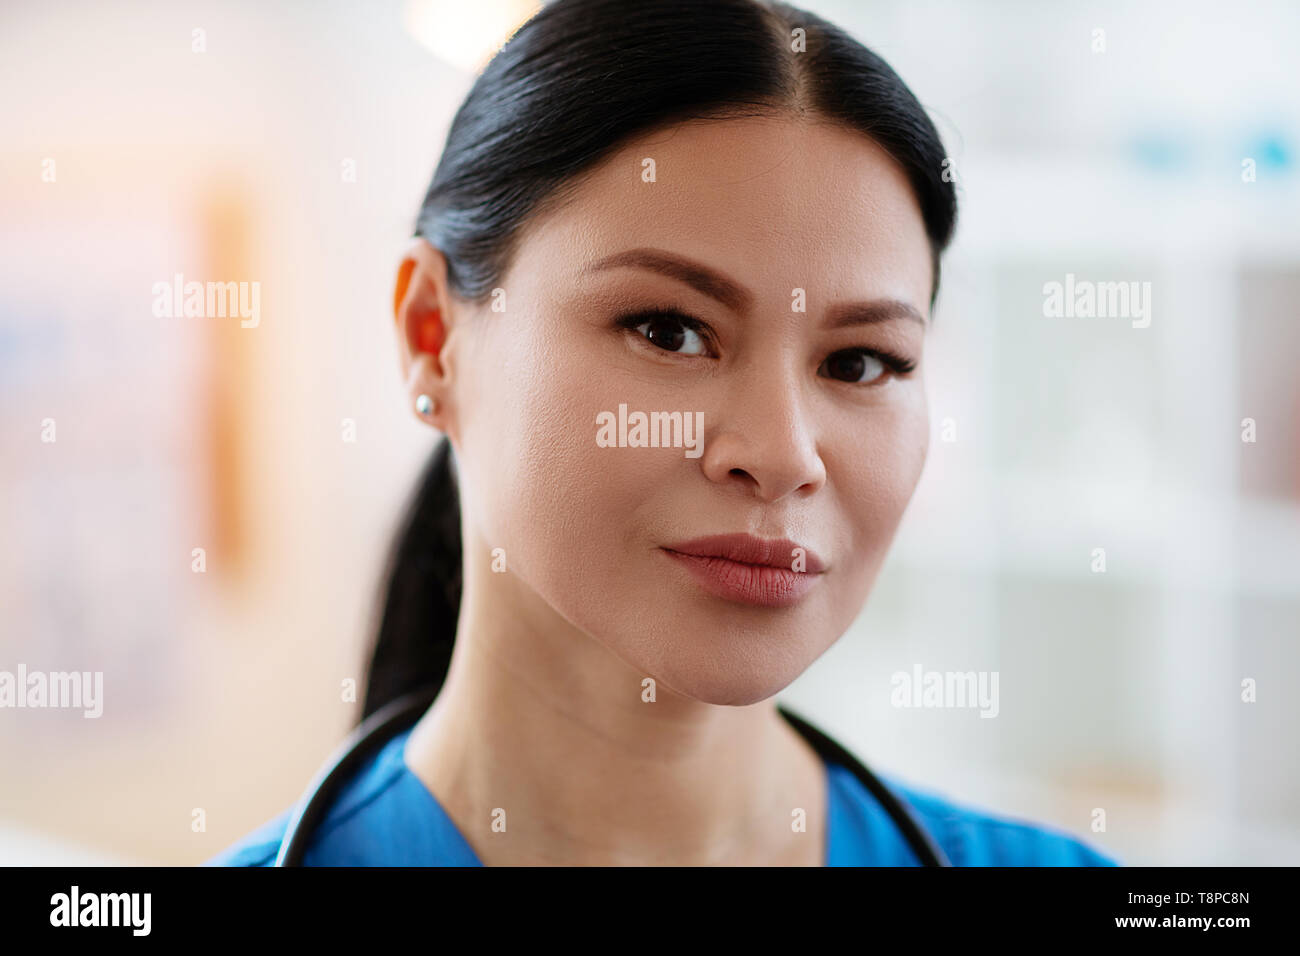 Dark-haired woman with tied hair being a doctor Stock Photo